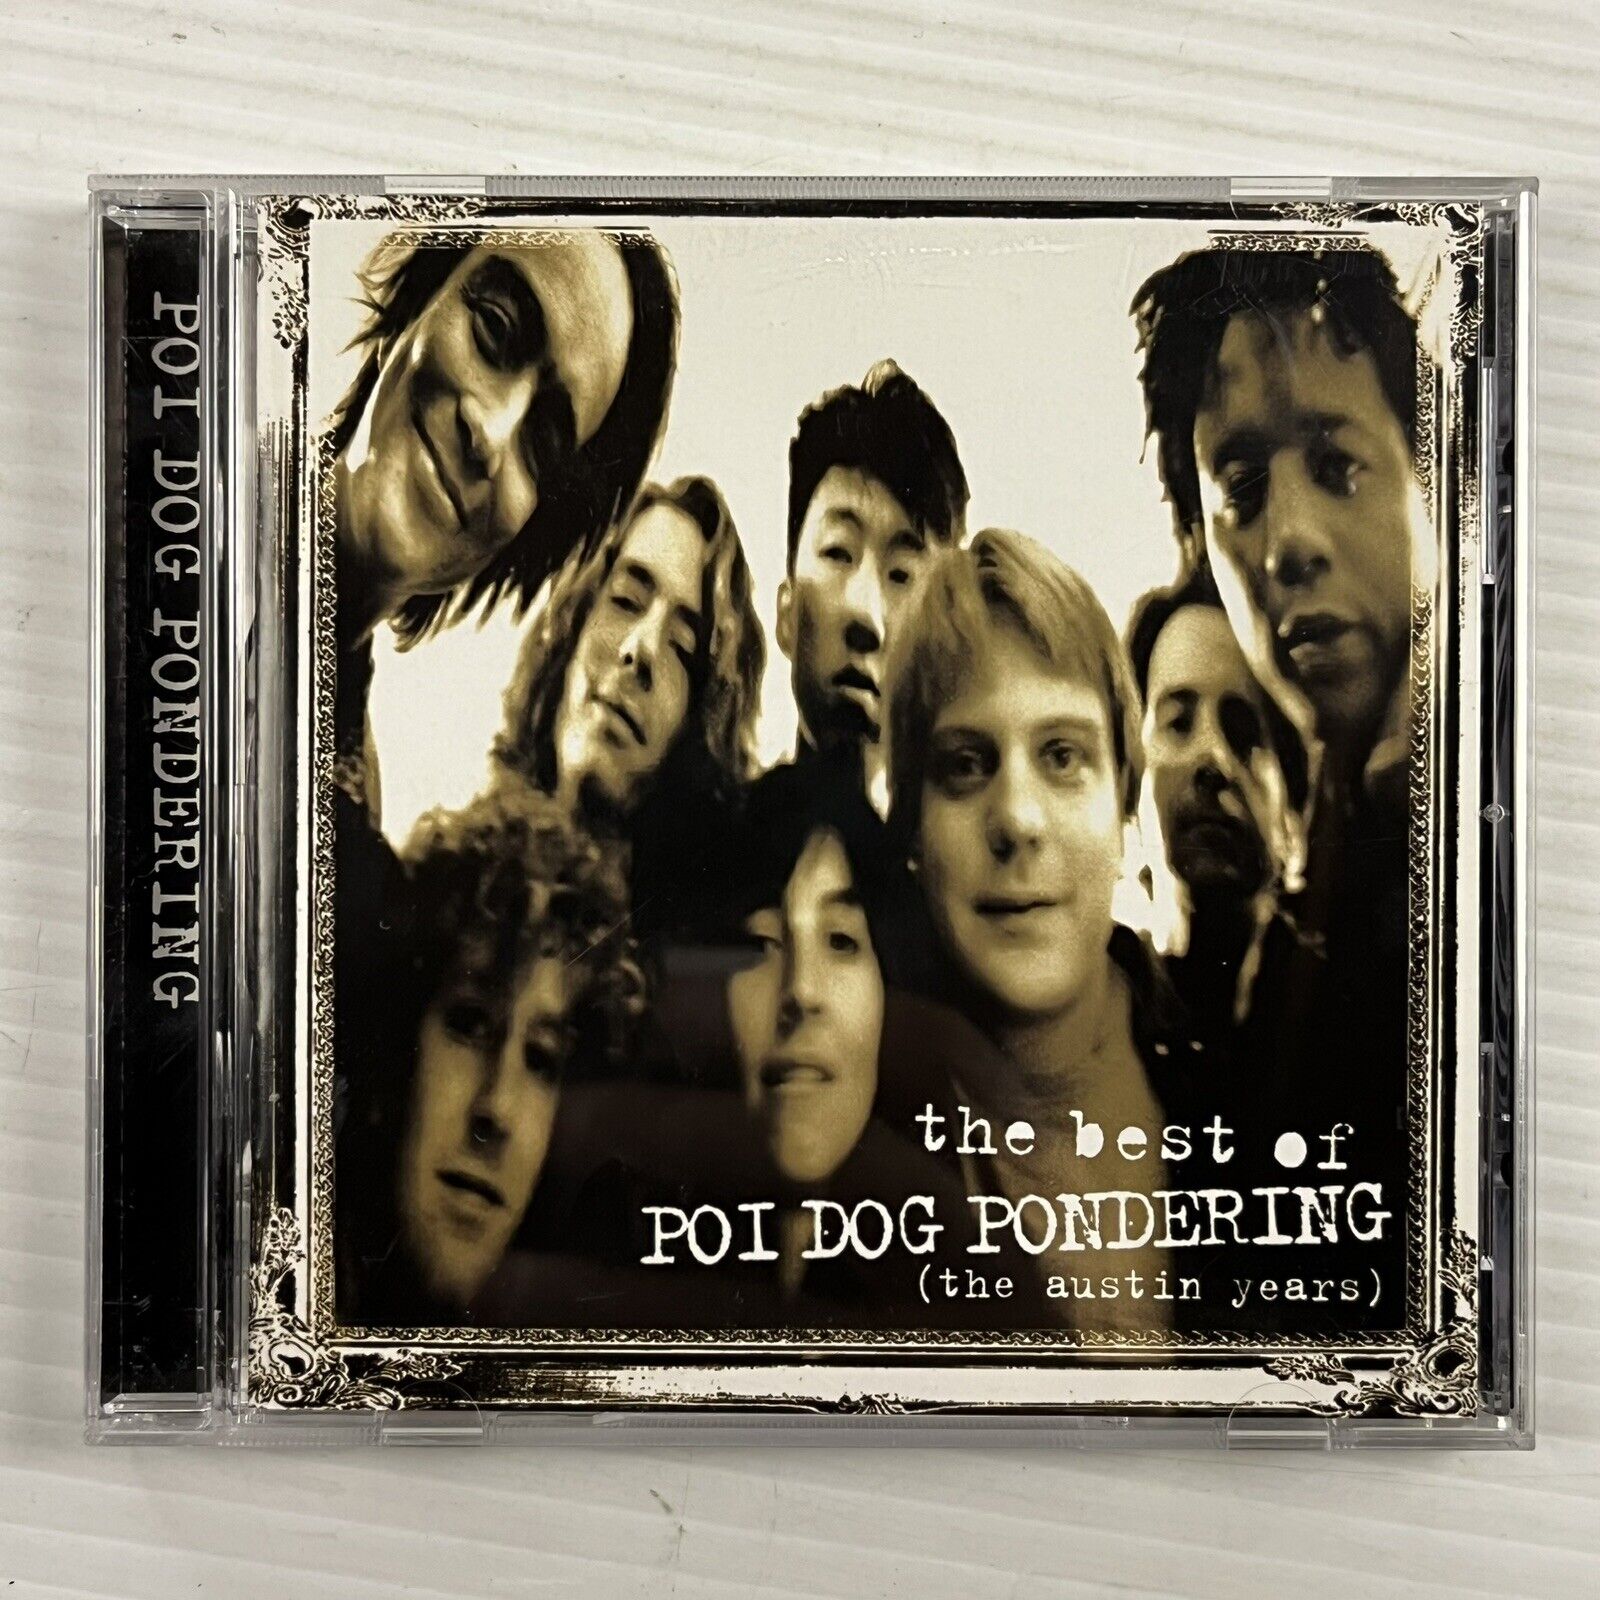 The Best Of Poi Dog Pondering: The Austin Years by Poi Dog Pondering (CD, 2005)